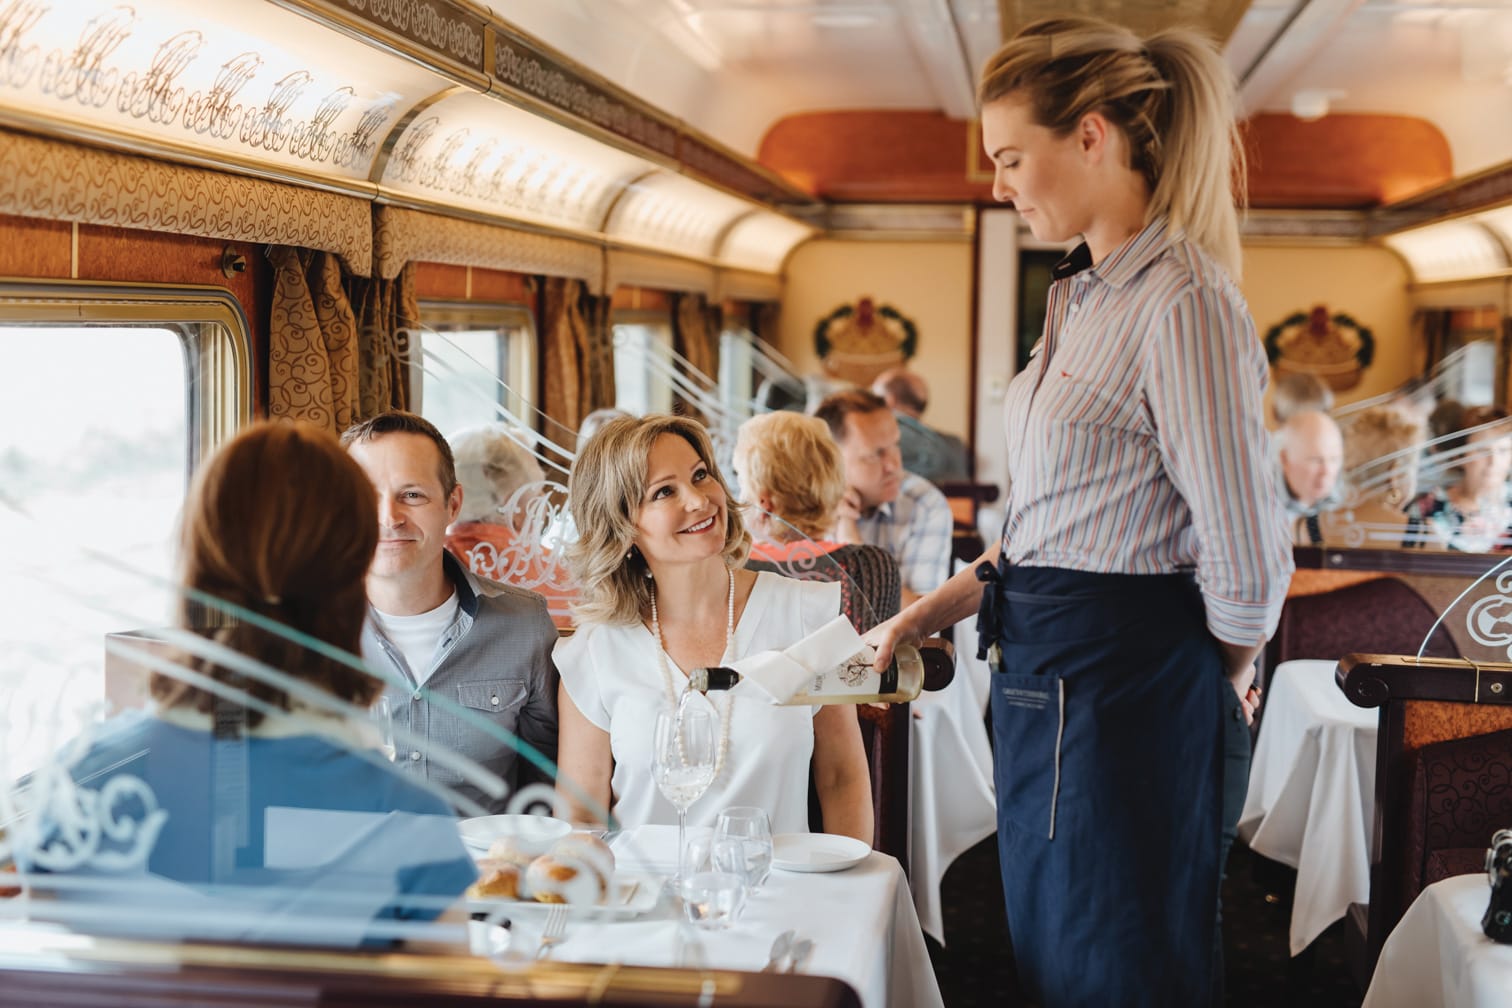 A Woman Serving Passengers In The Ghan